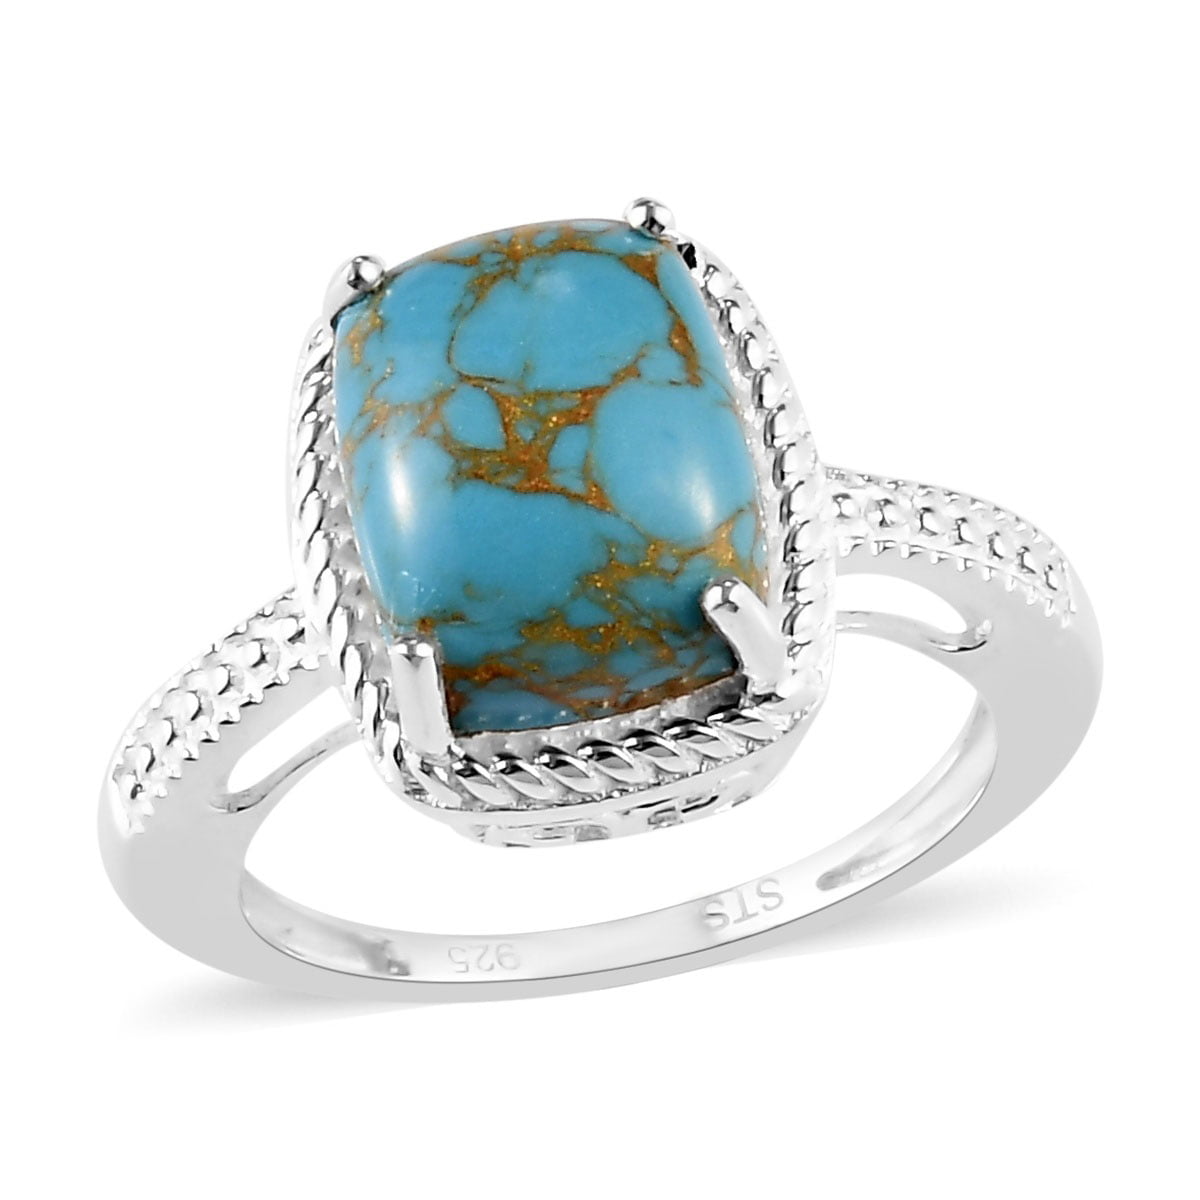 Turquoise Stone Gemstone Statement Ring Gift Jewellery For Girl Women 925 Sterling Silver Turquoise Ring Size US 8